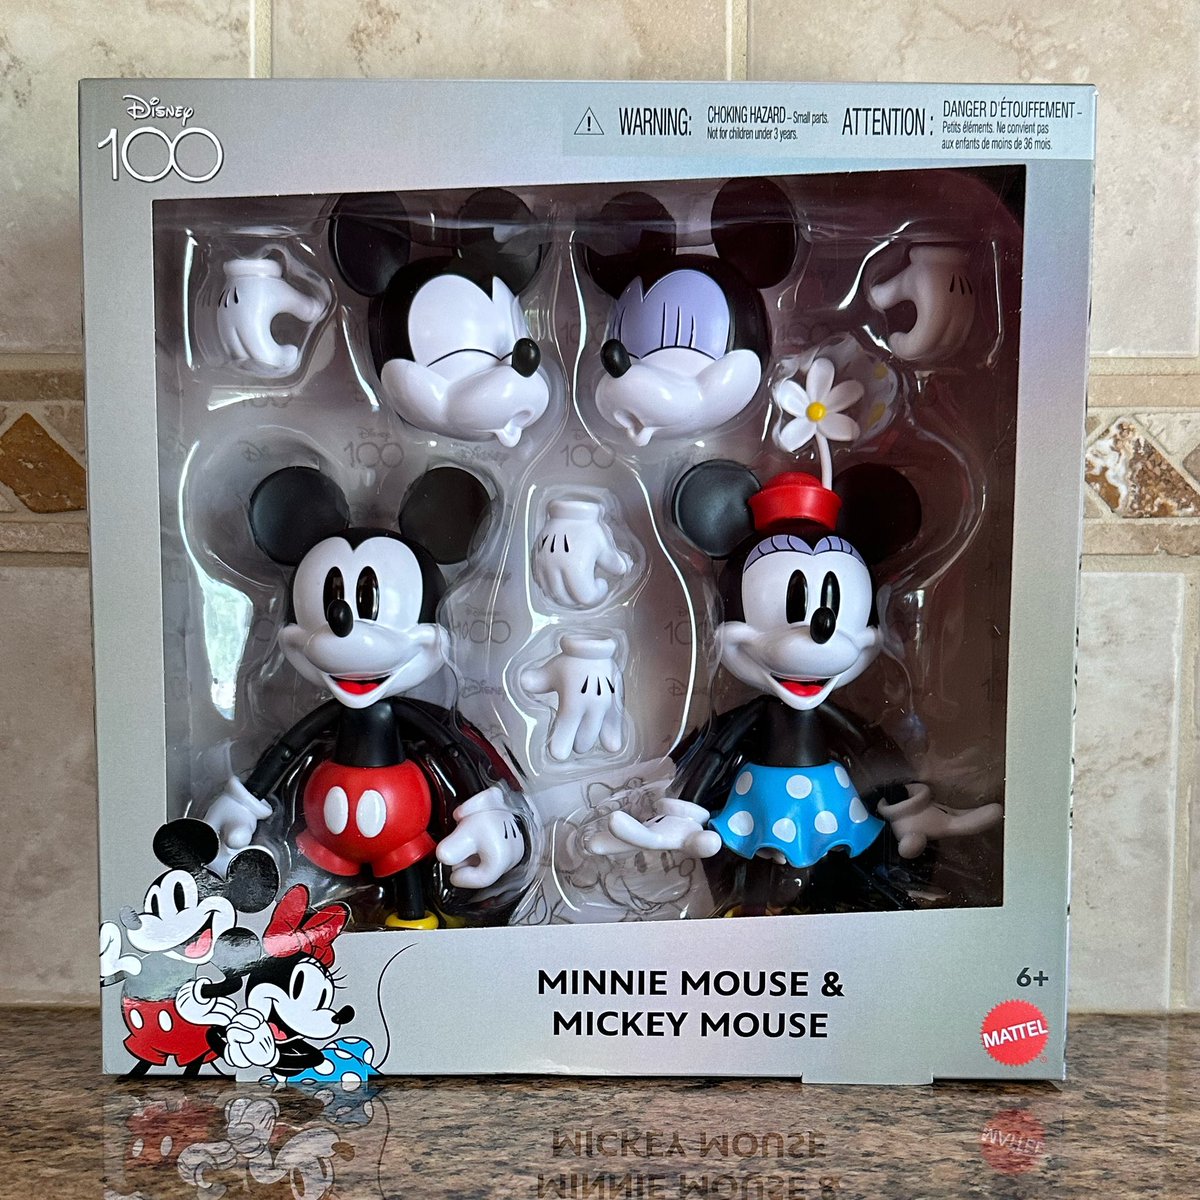 Mail Call! Got my Mickey & Minnie Disney 100 Action Figure set!
.
#MickeyMouse #MinnieMouse #Mattel #Funko #Collectibles #DisTrackers